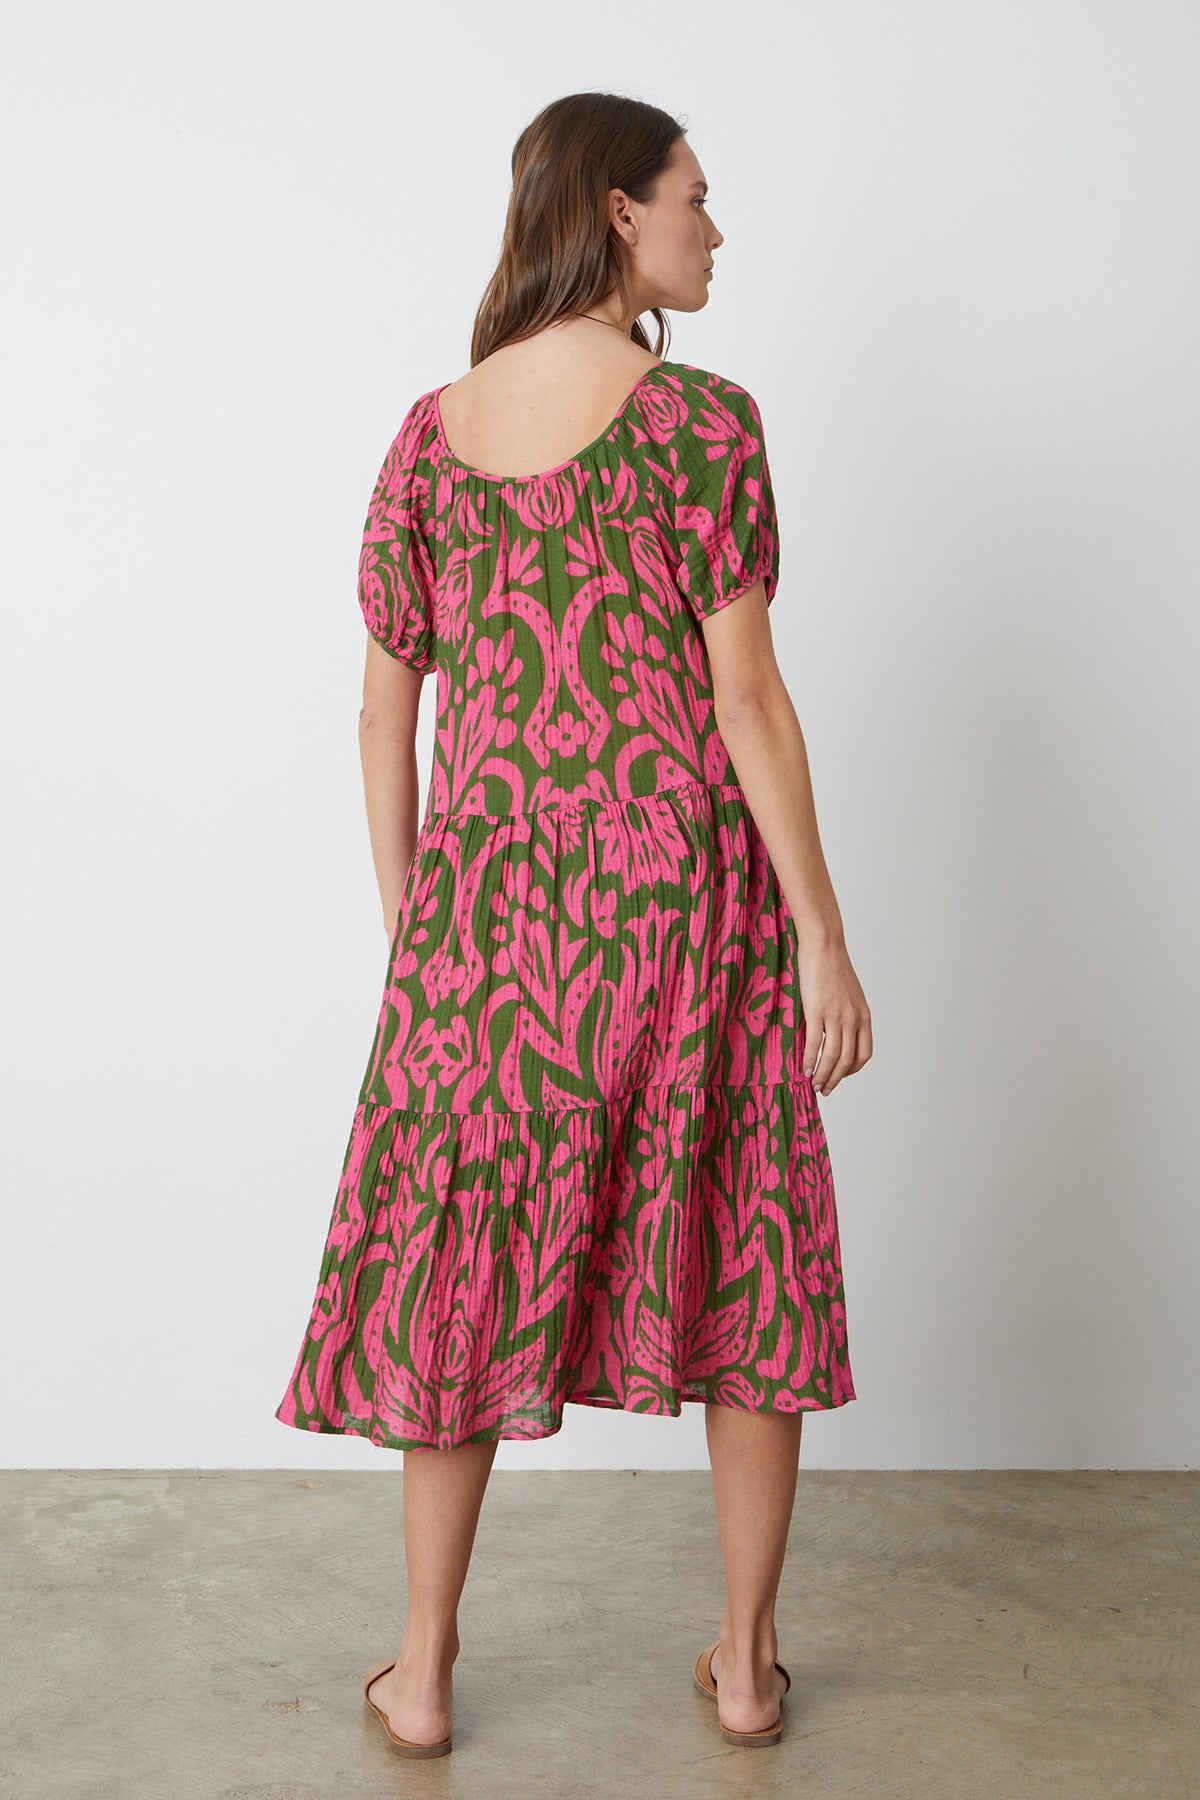   The back view of a woman wearing the Velvet by Graham & Spencer MADILYN PRINTED COTTON GAUZE MIDI DRESS in pink and green. 